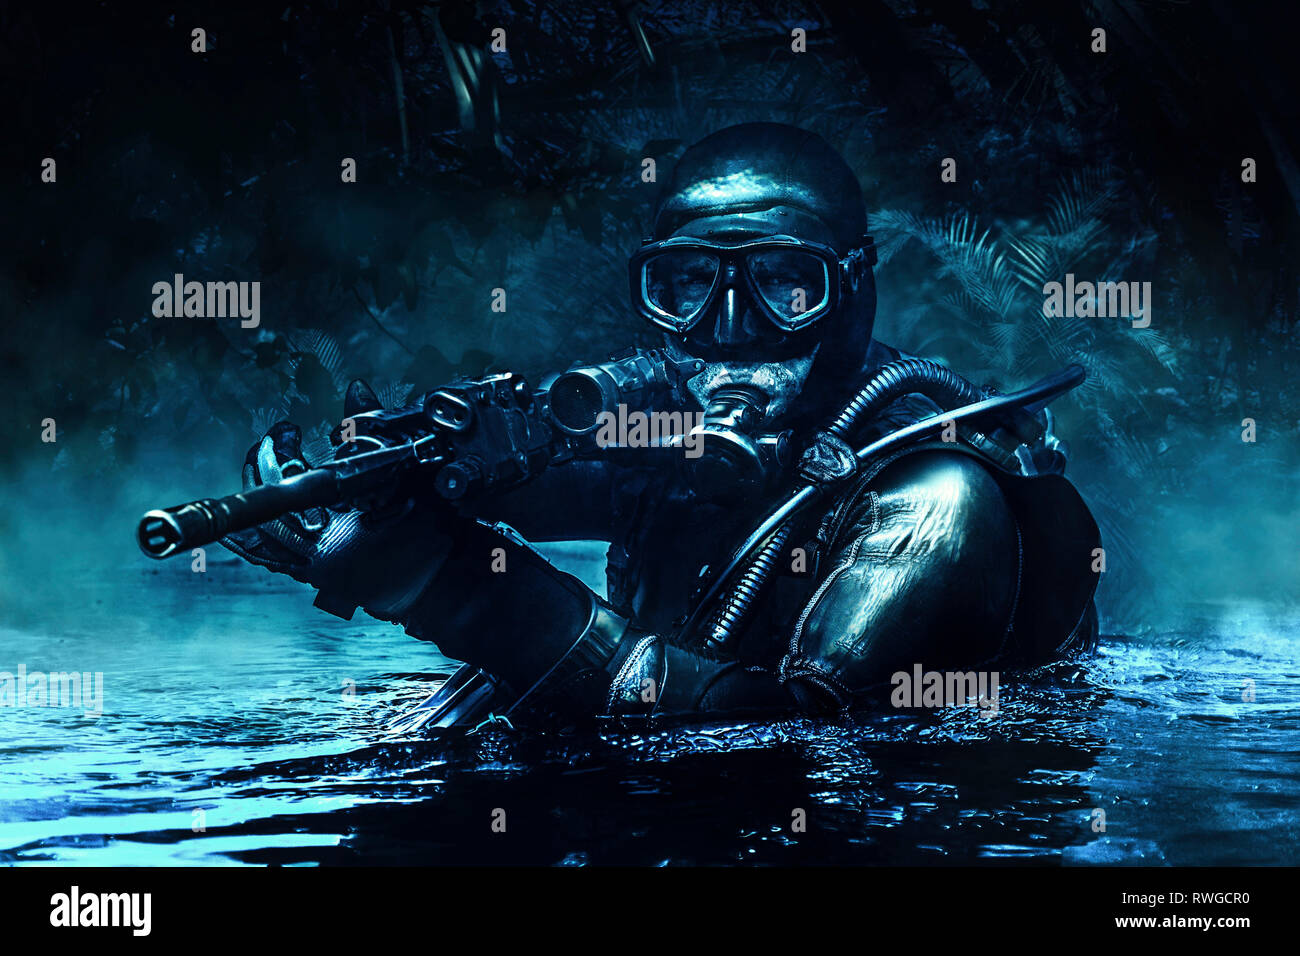 Frogman rises from the water on a dark moonlit night in the jungle. Stock Photo